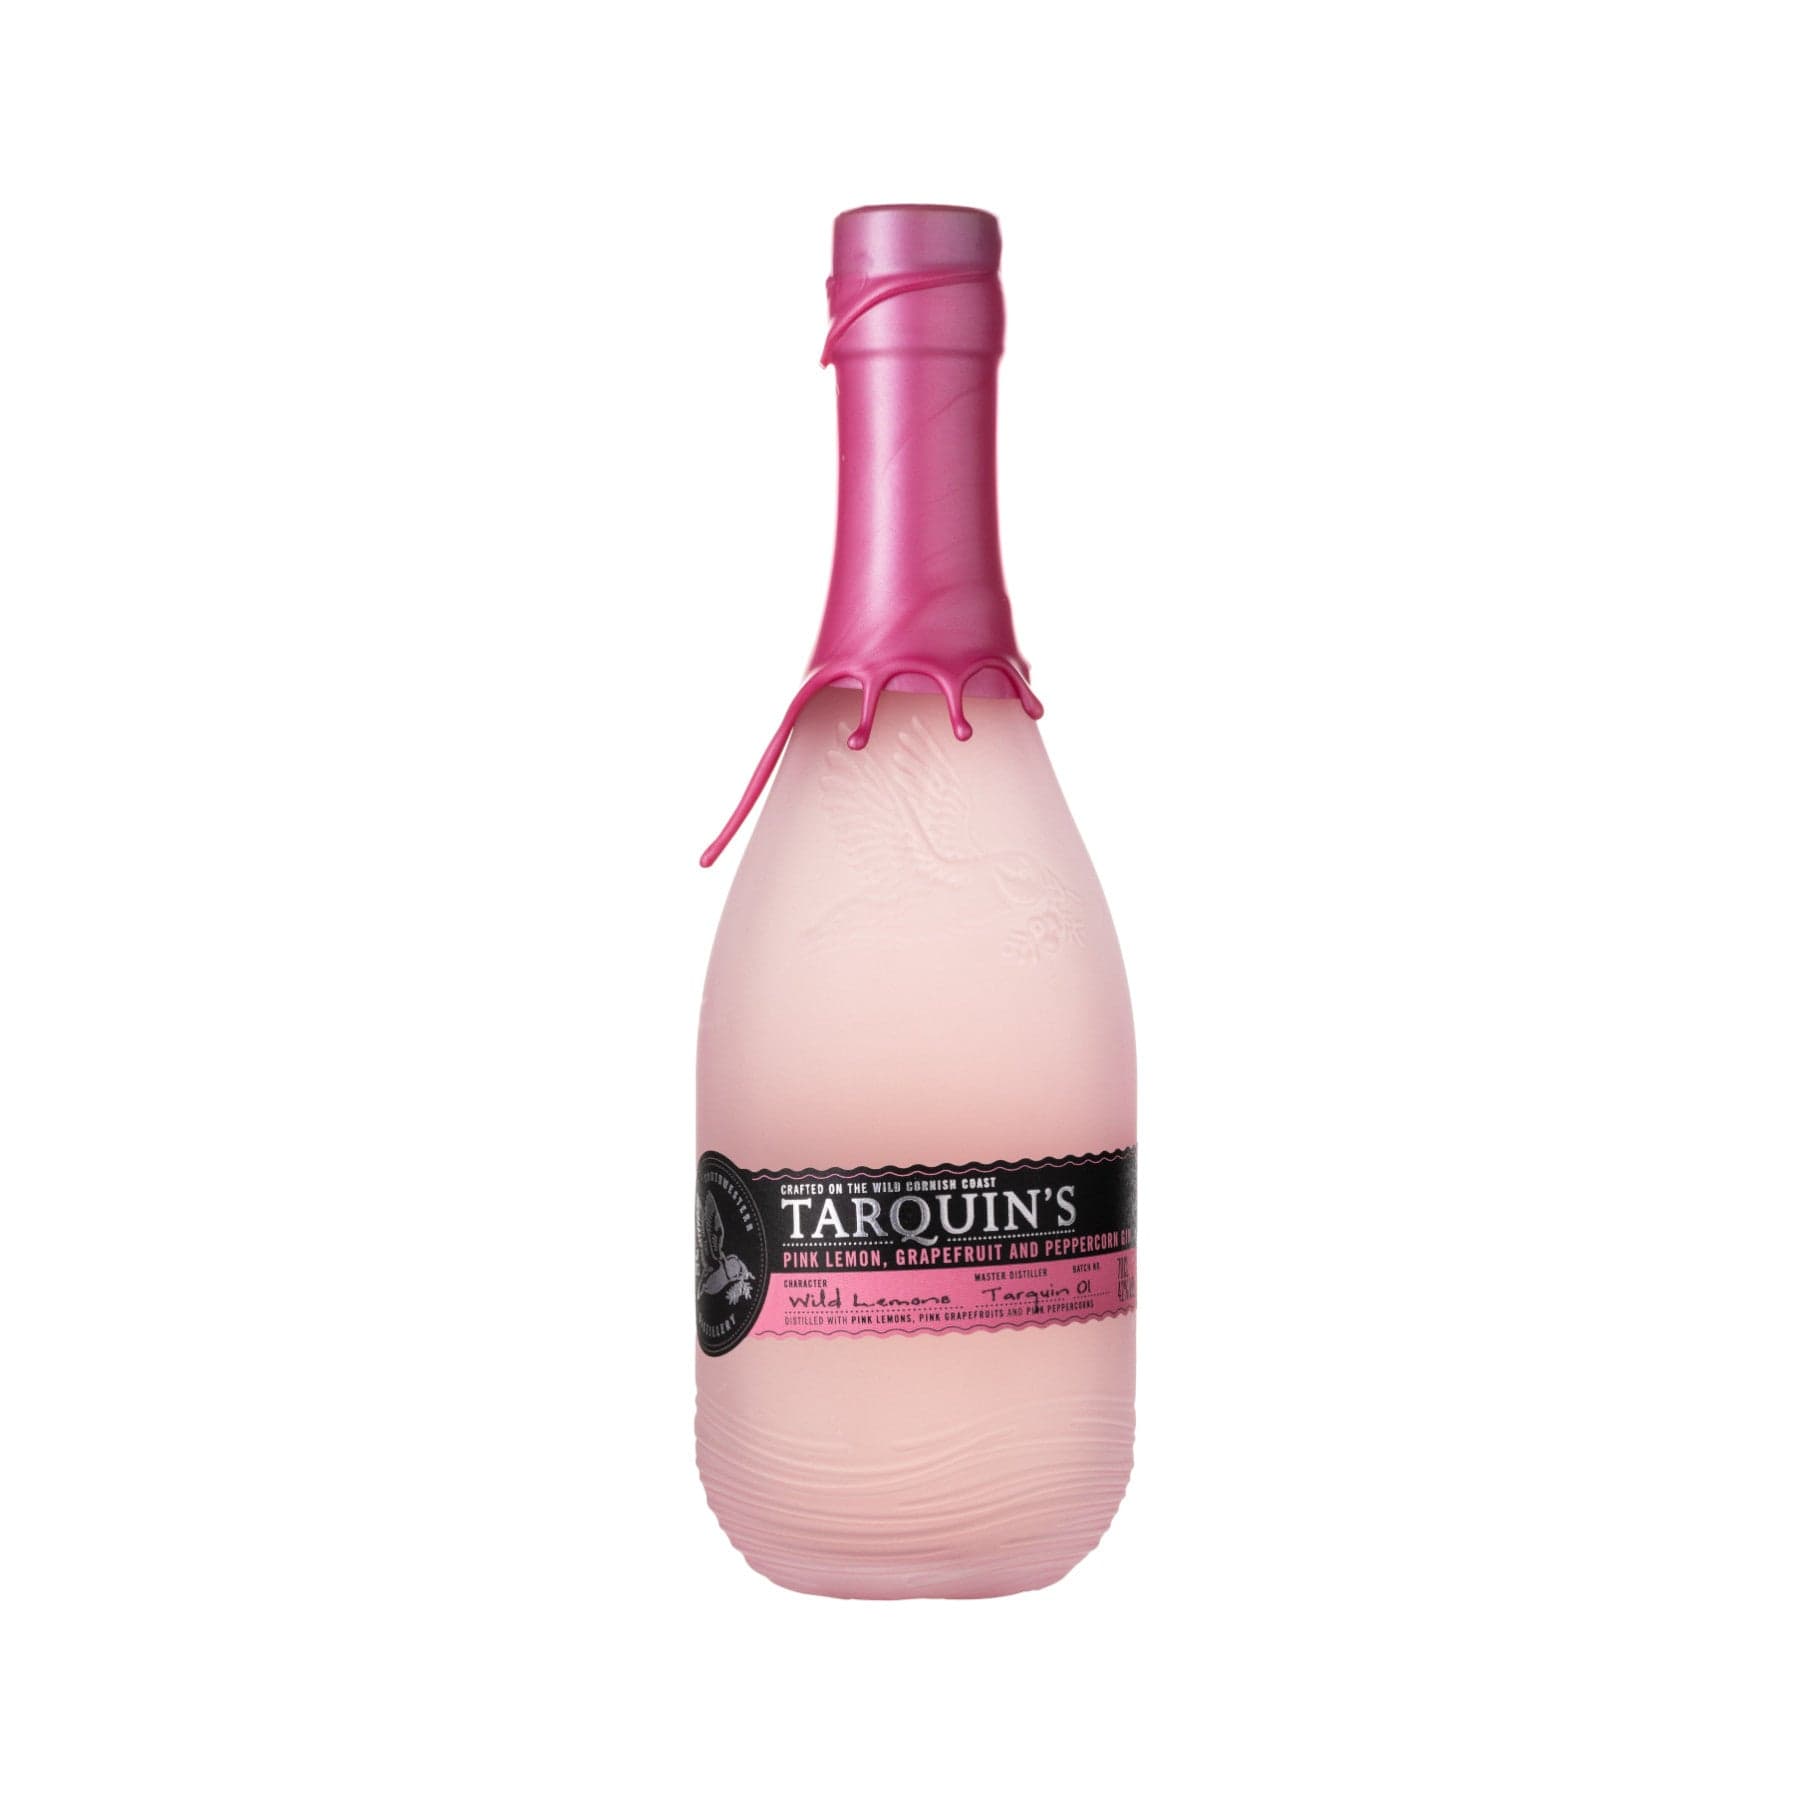 Pink Tarquin's gin bottle with wax seal, botanical design, labeled Pink Lemon, Grapefruit and Peppermint.